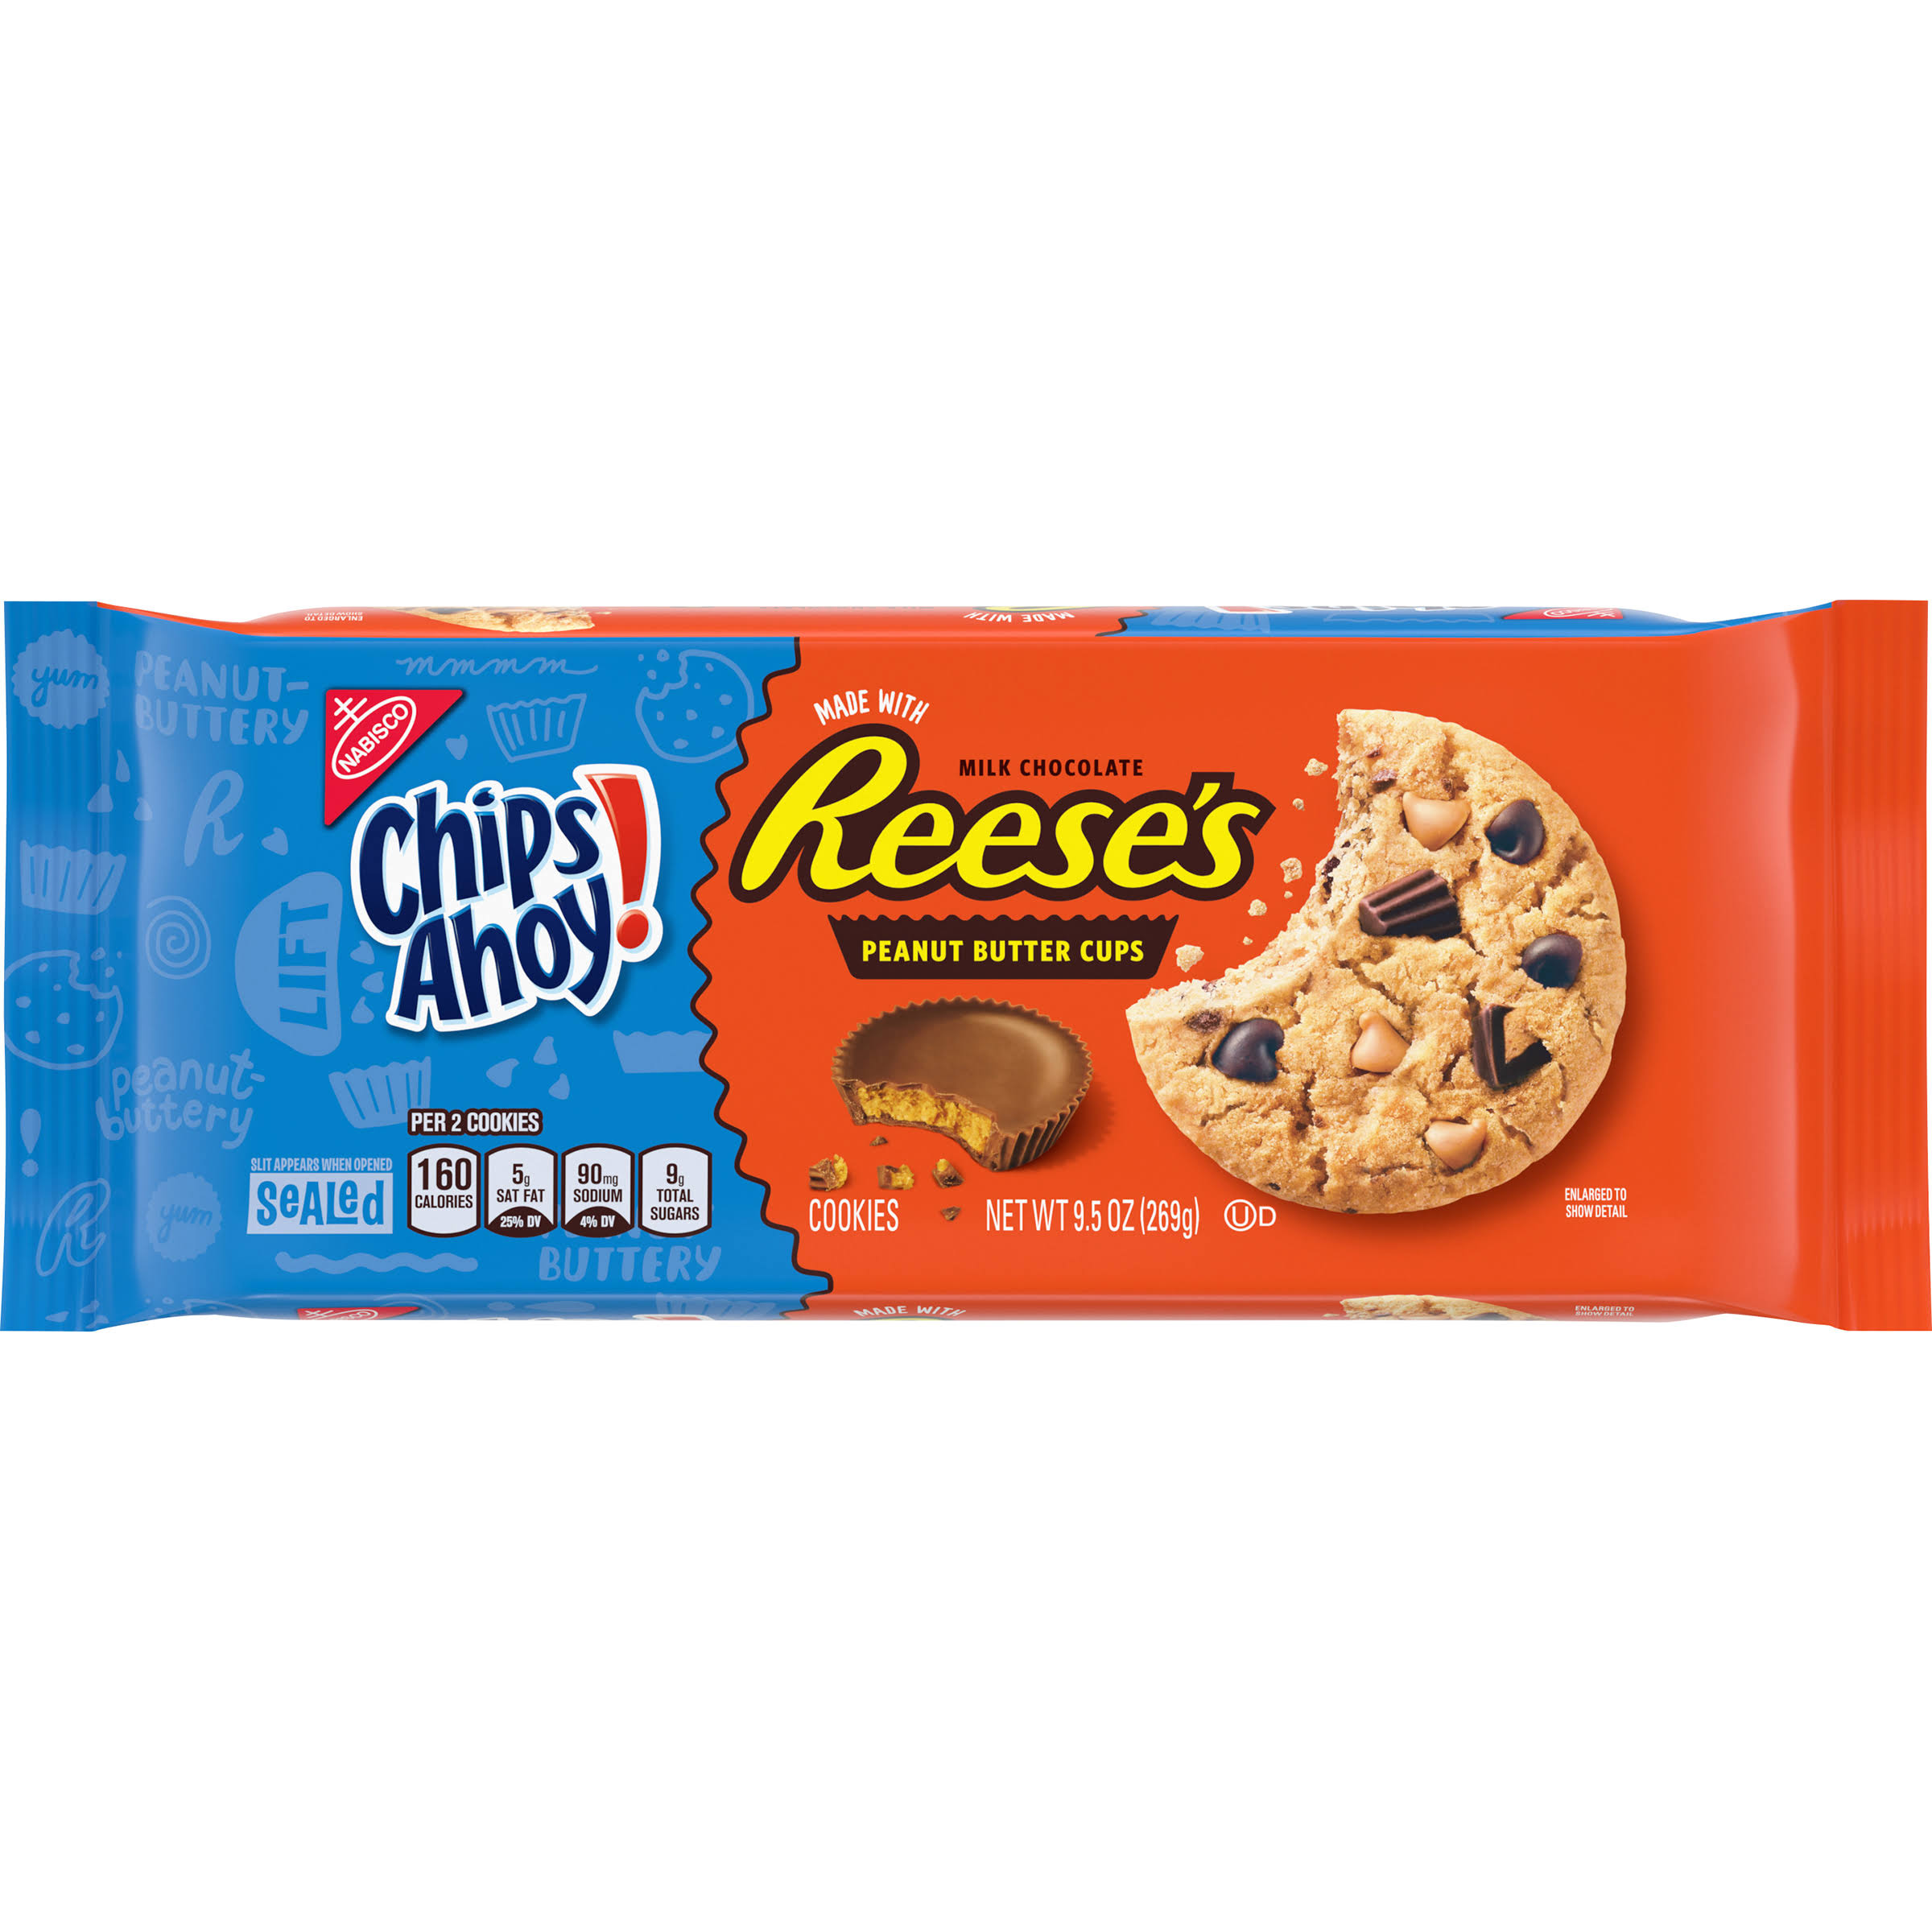 Chips Ahoy Reese's Peanut Butter Cups Cookies